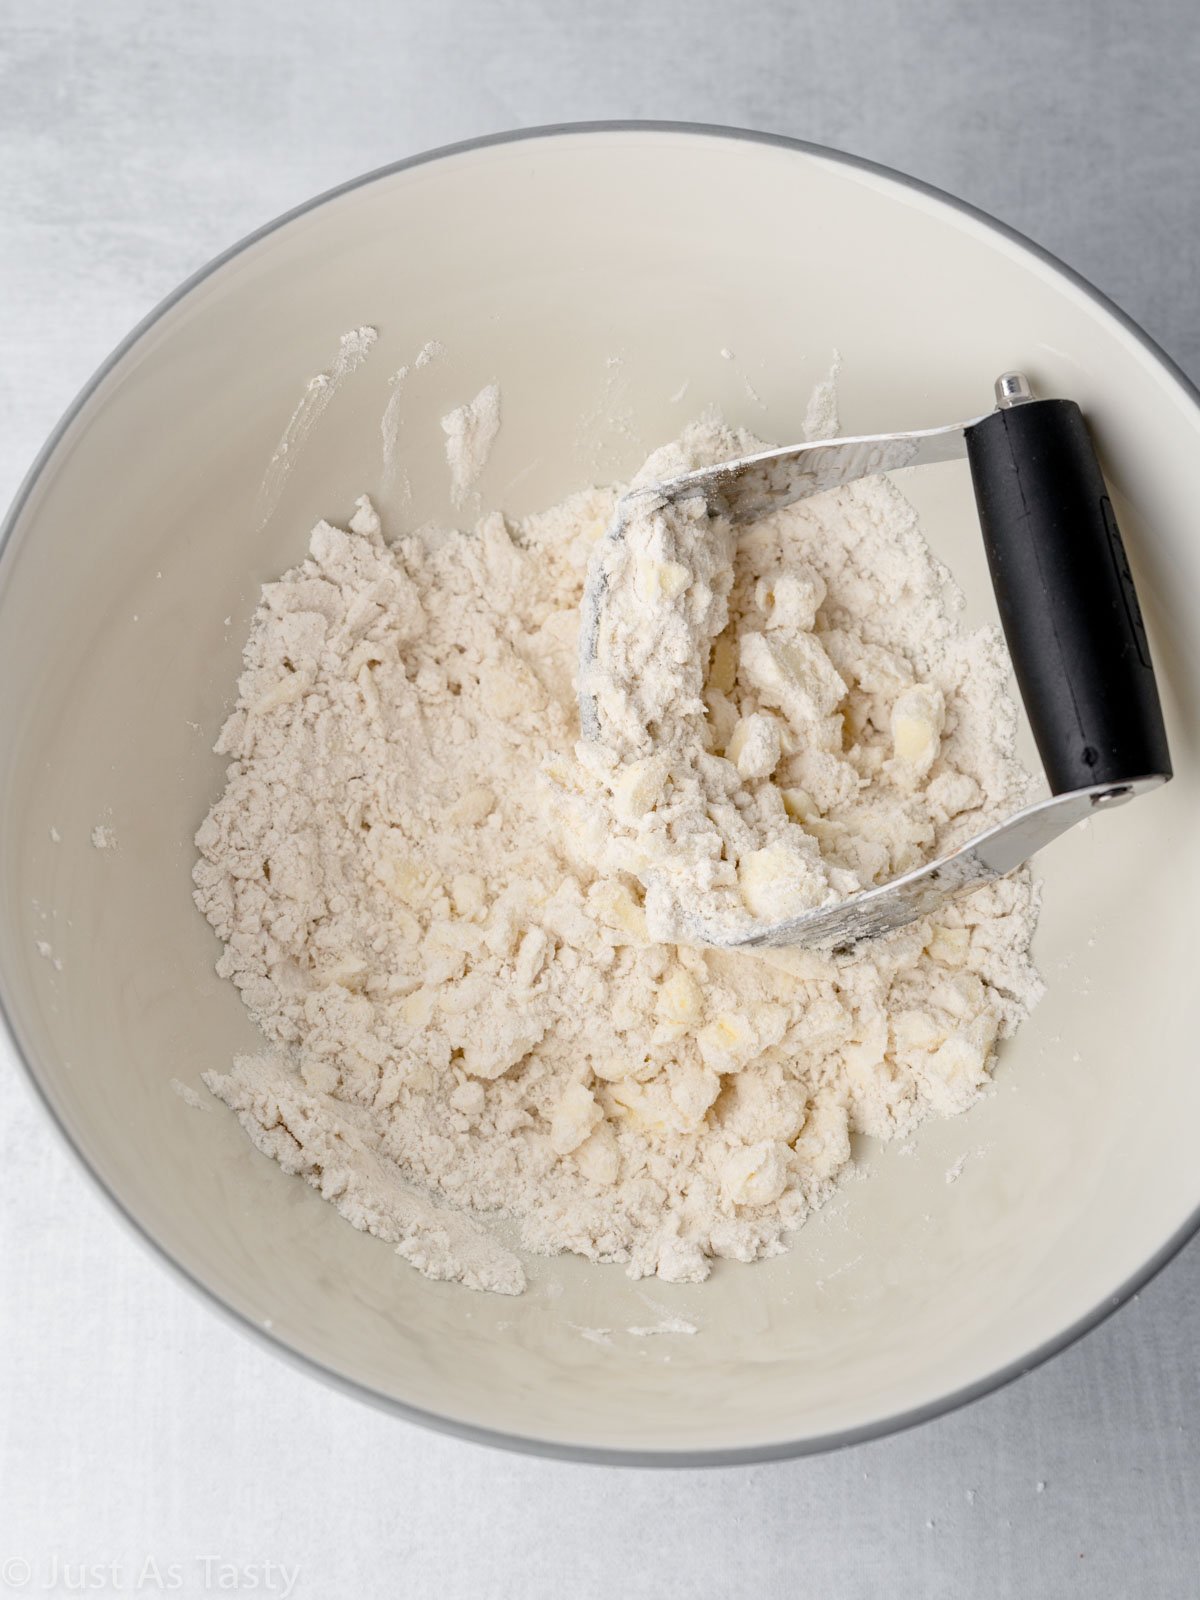 Pastry blender in mixing bowl with dry ingredients and pieces of butter.